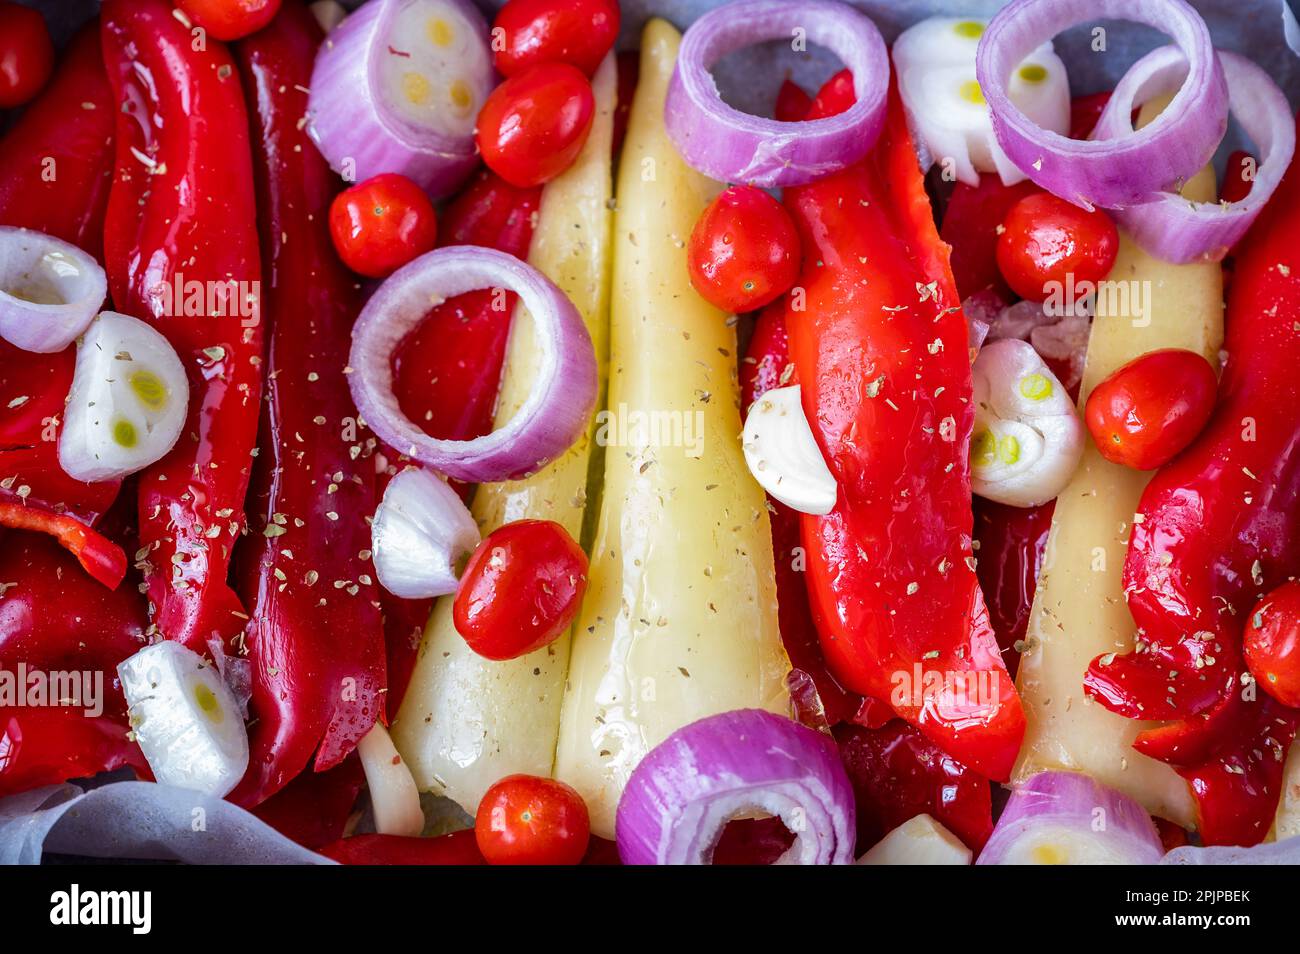 Sliced red and yellow pepper, onion circle, cherry tomato and garlic, preparation of food. Stock Photo